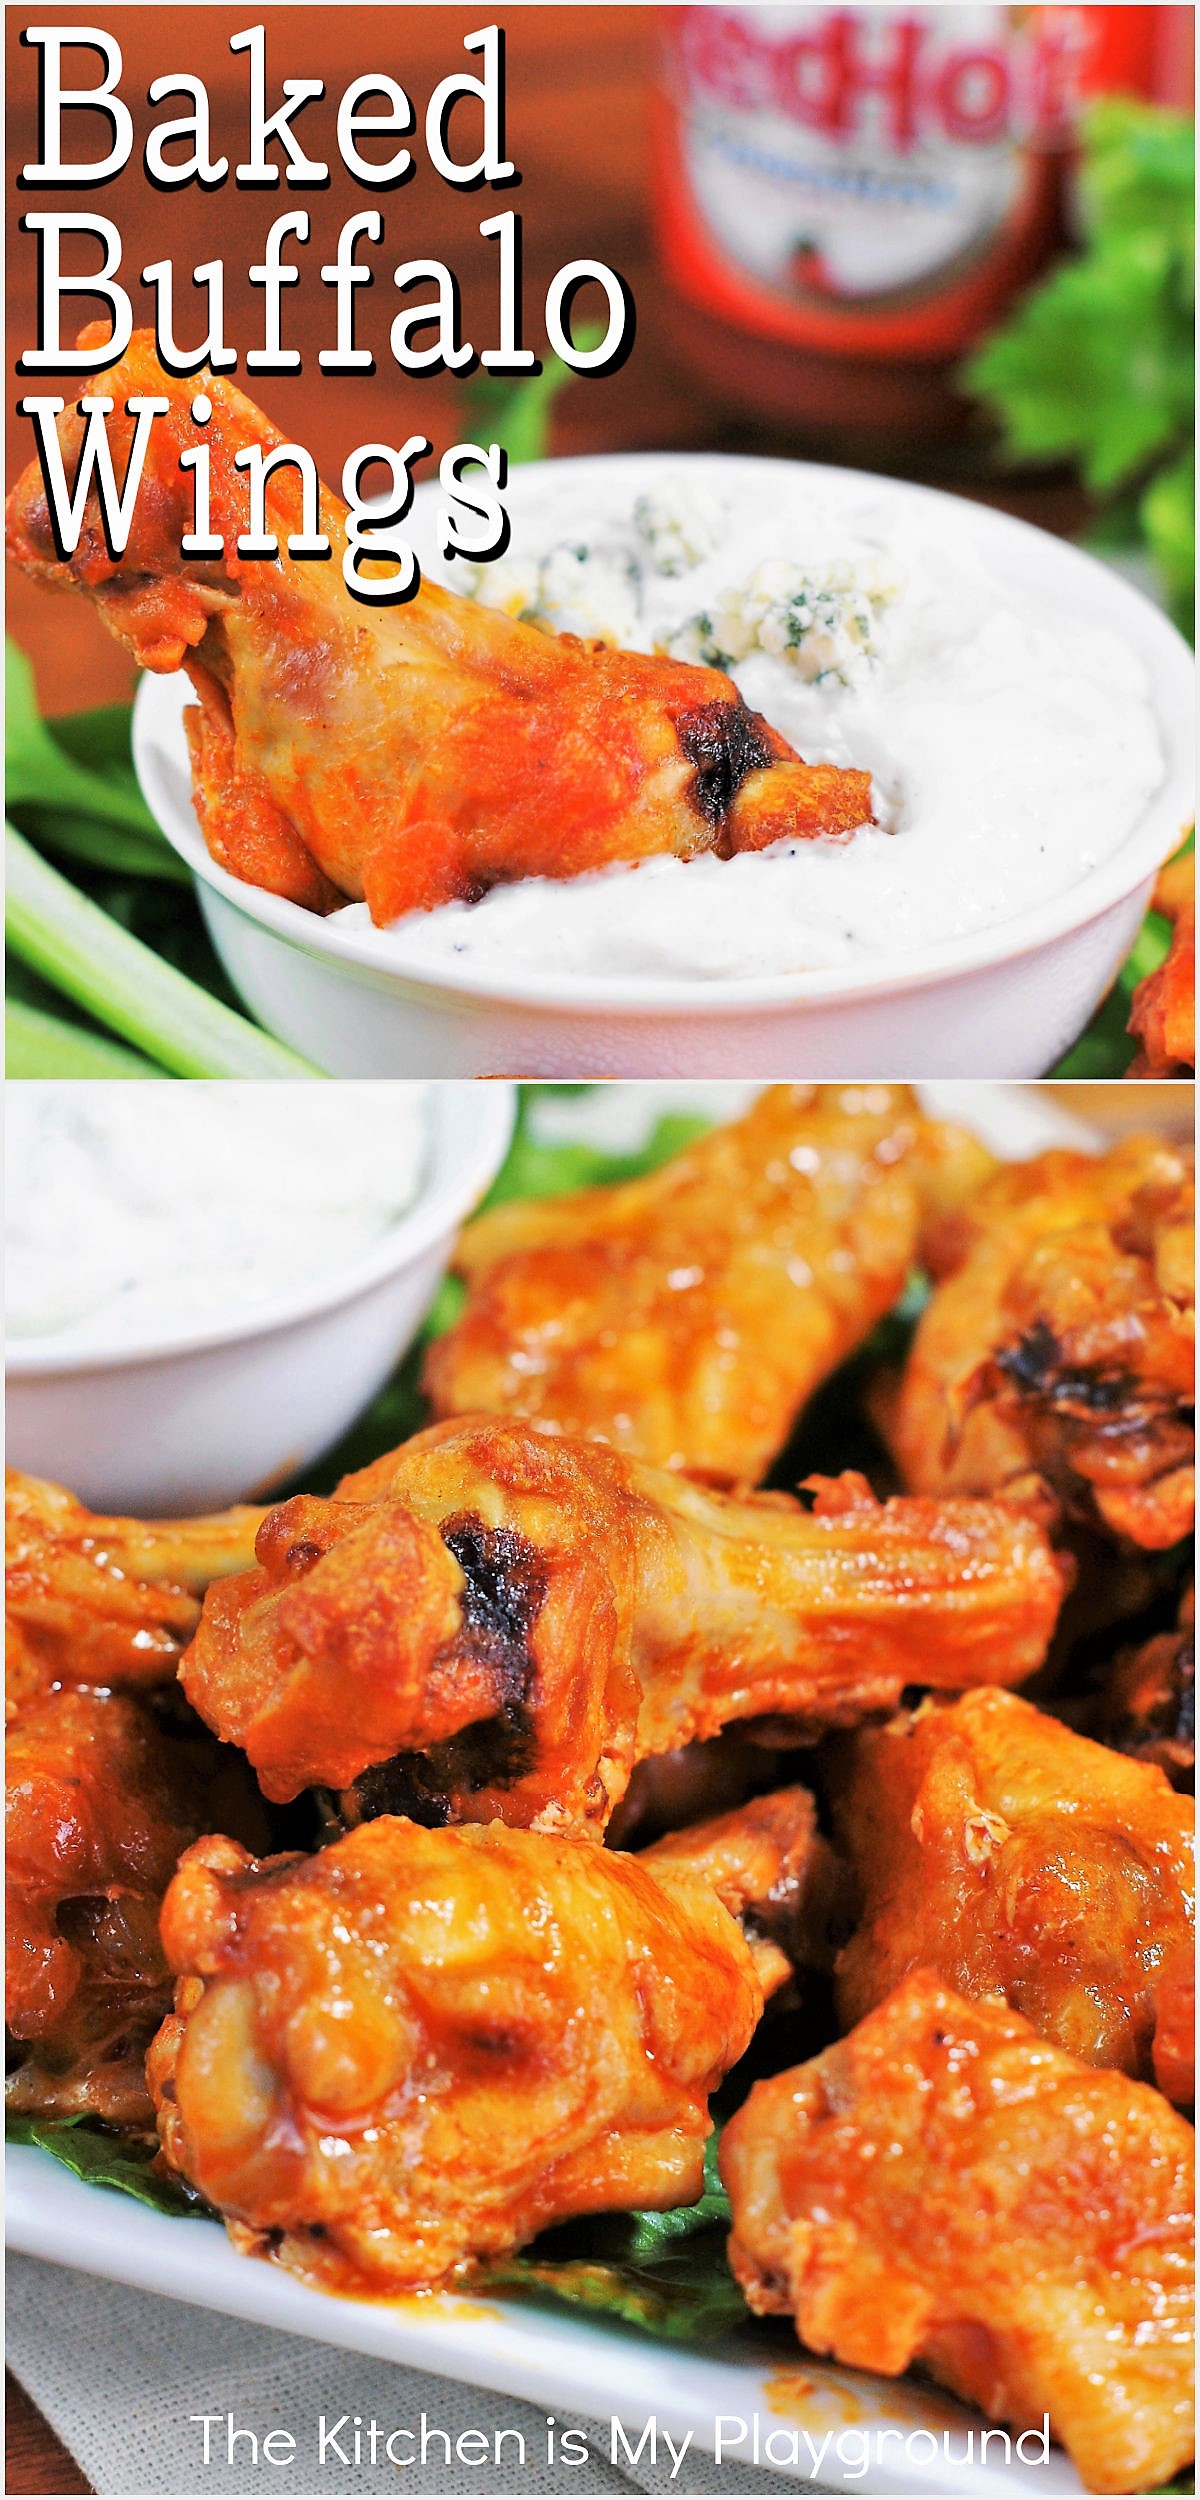 Baked Buffalo Wings | The Kitchen is My Playground